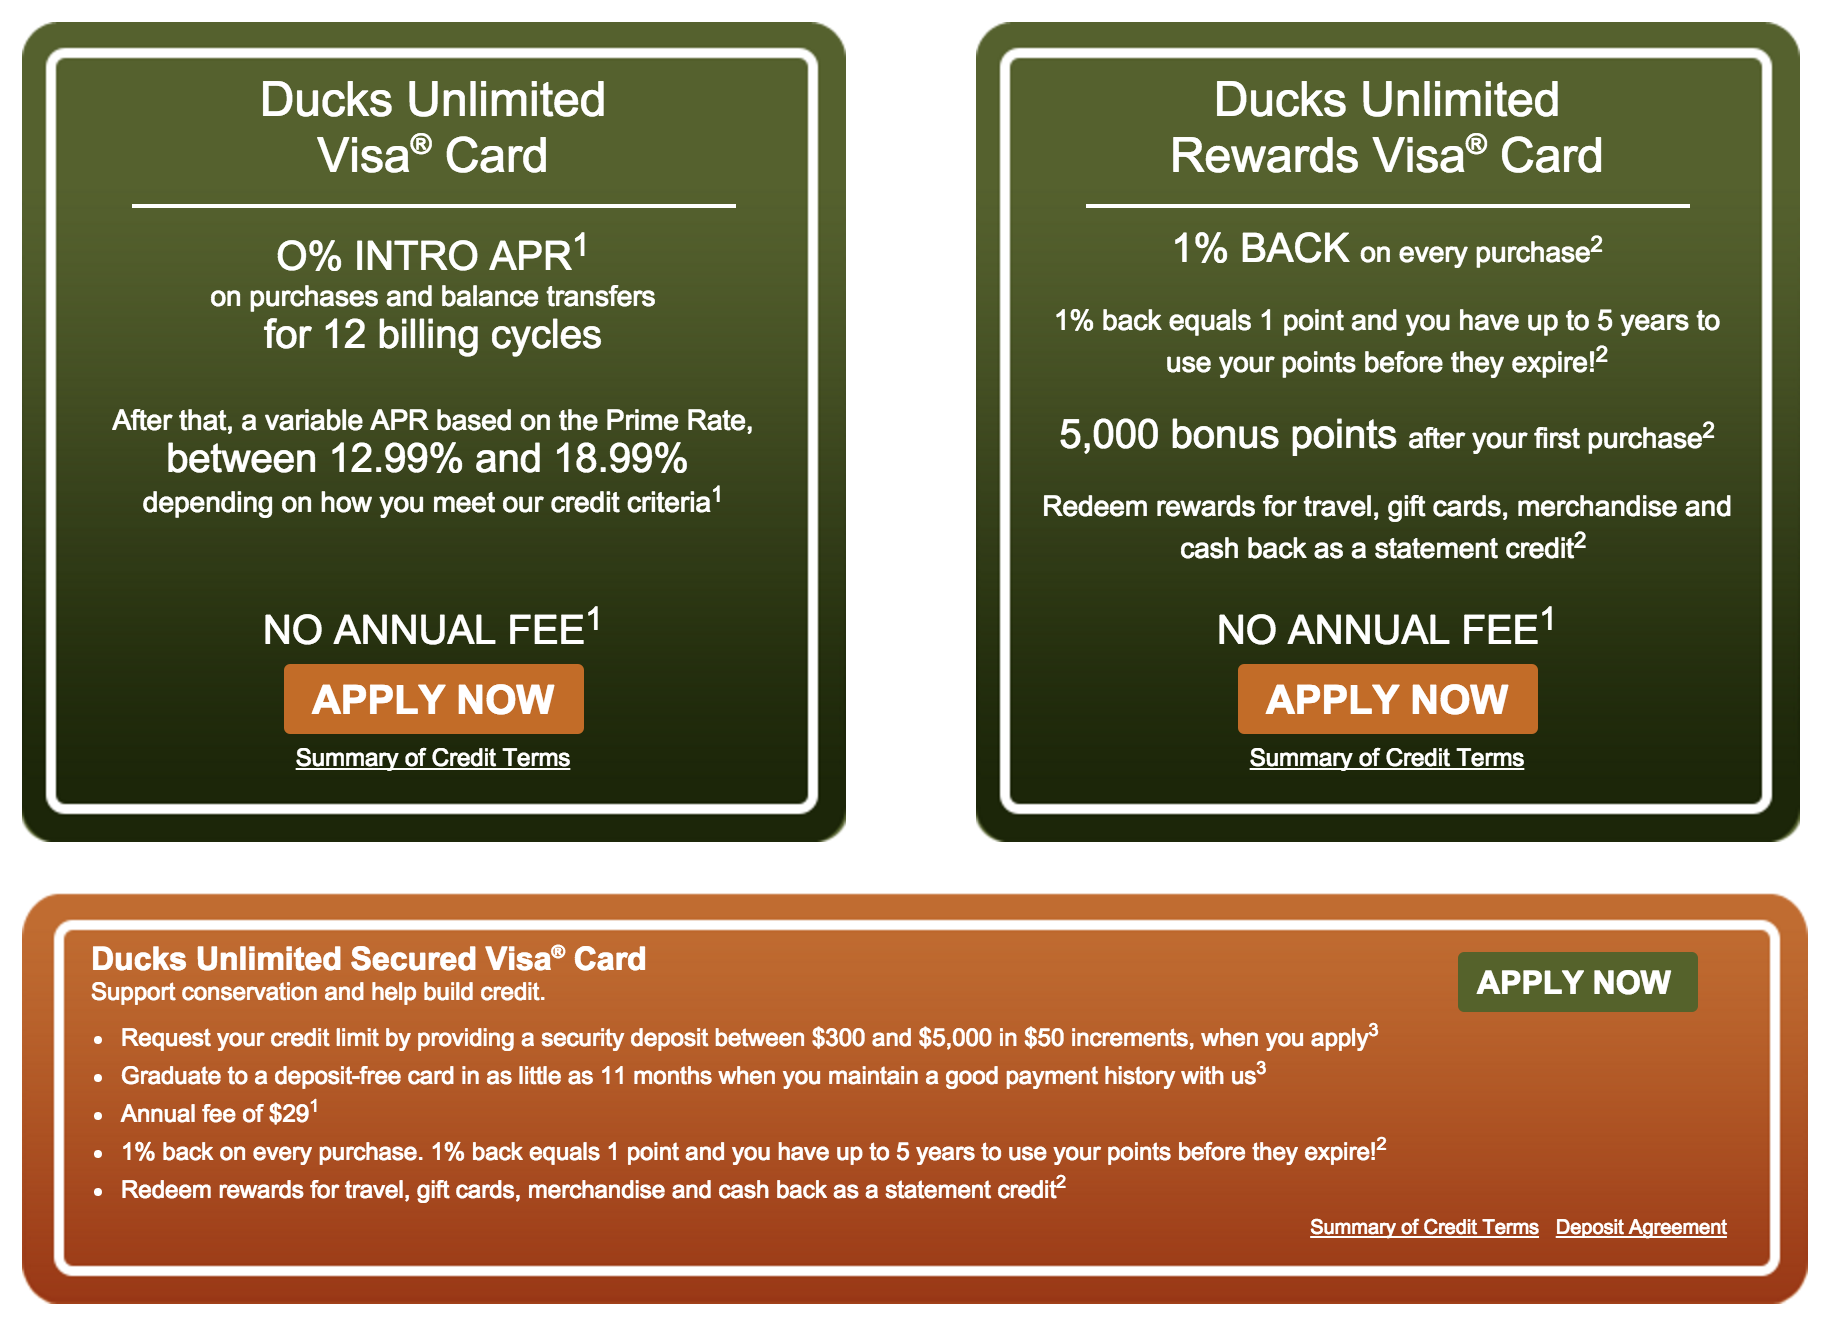 How to Apply for the Ducks Unlimited Visa Rewards Credit Card